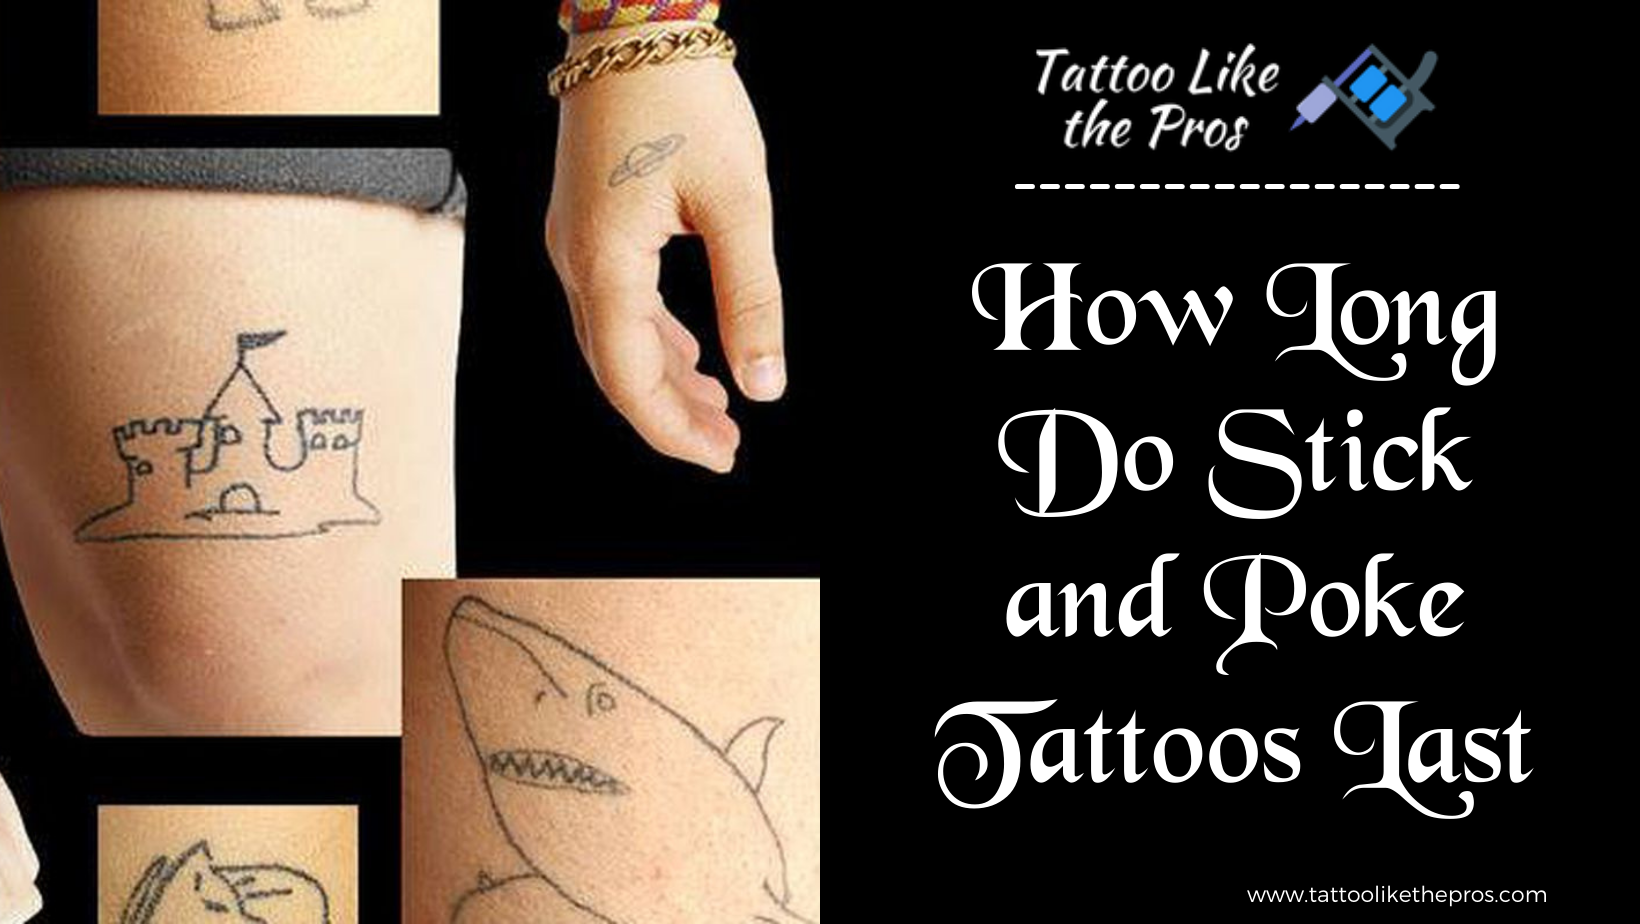 How long do stick and poke tattoos last